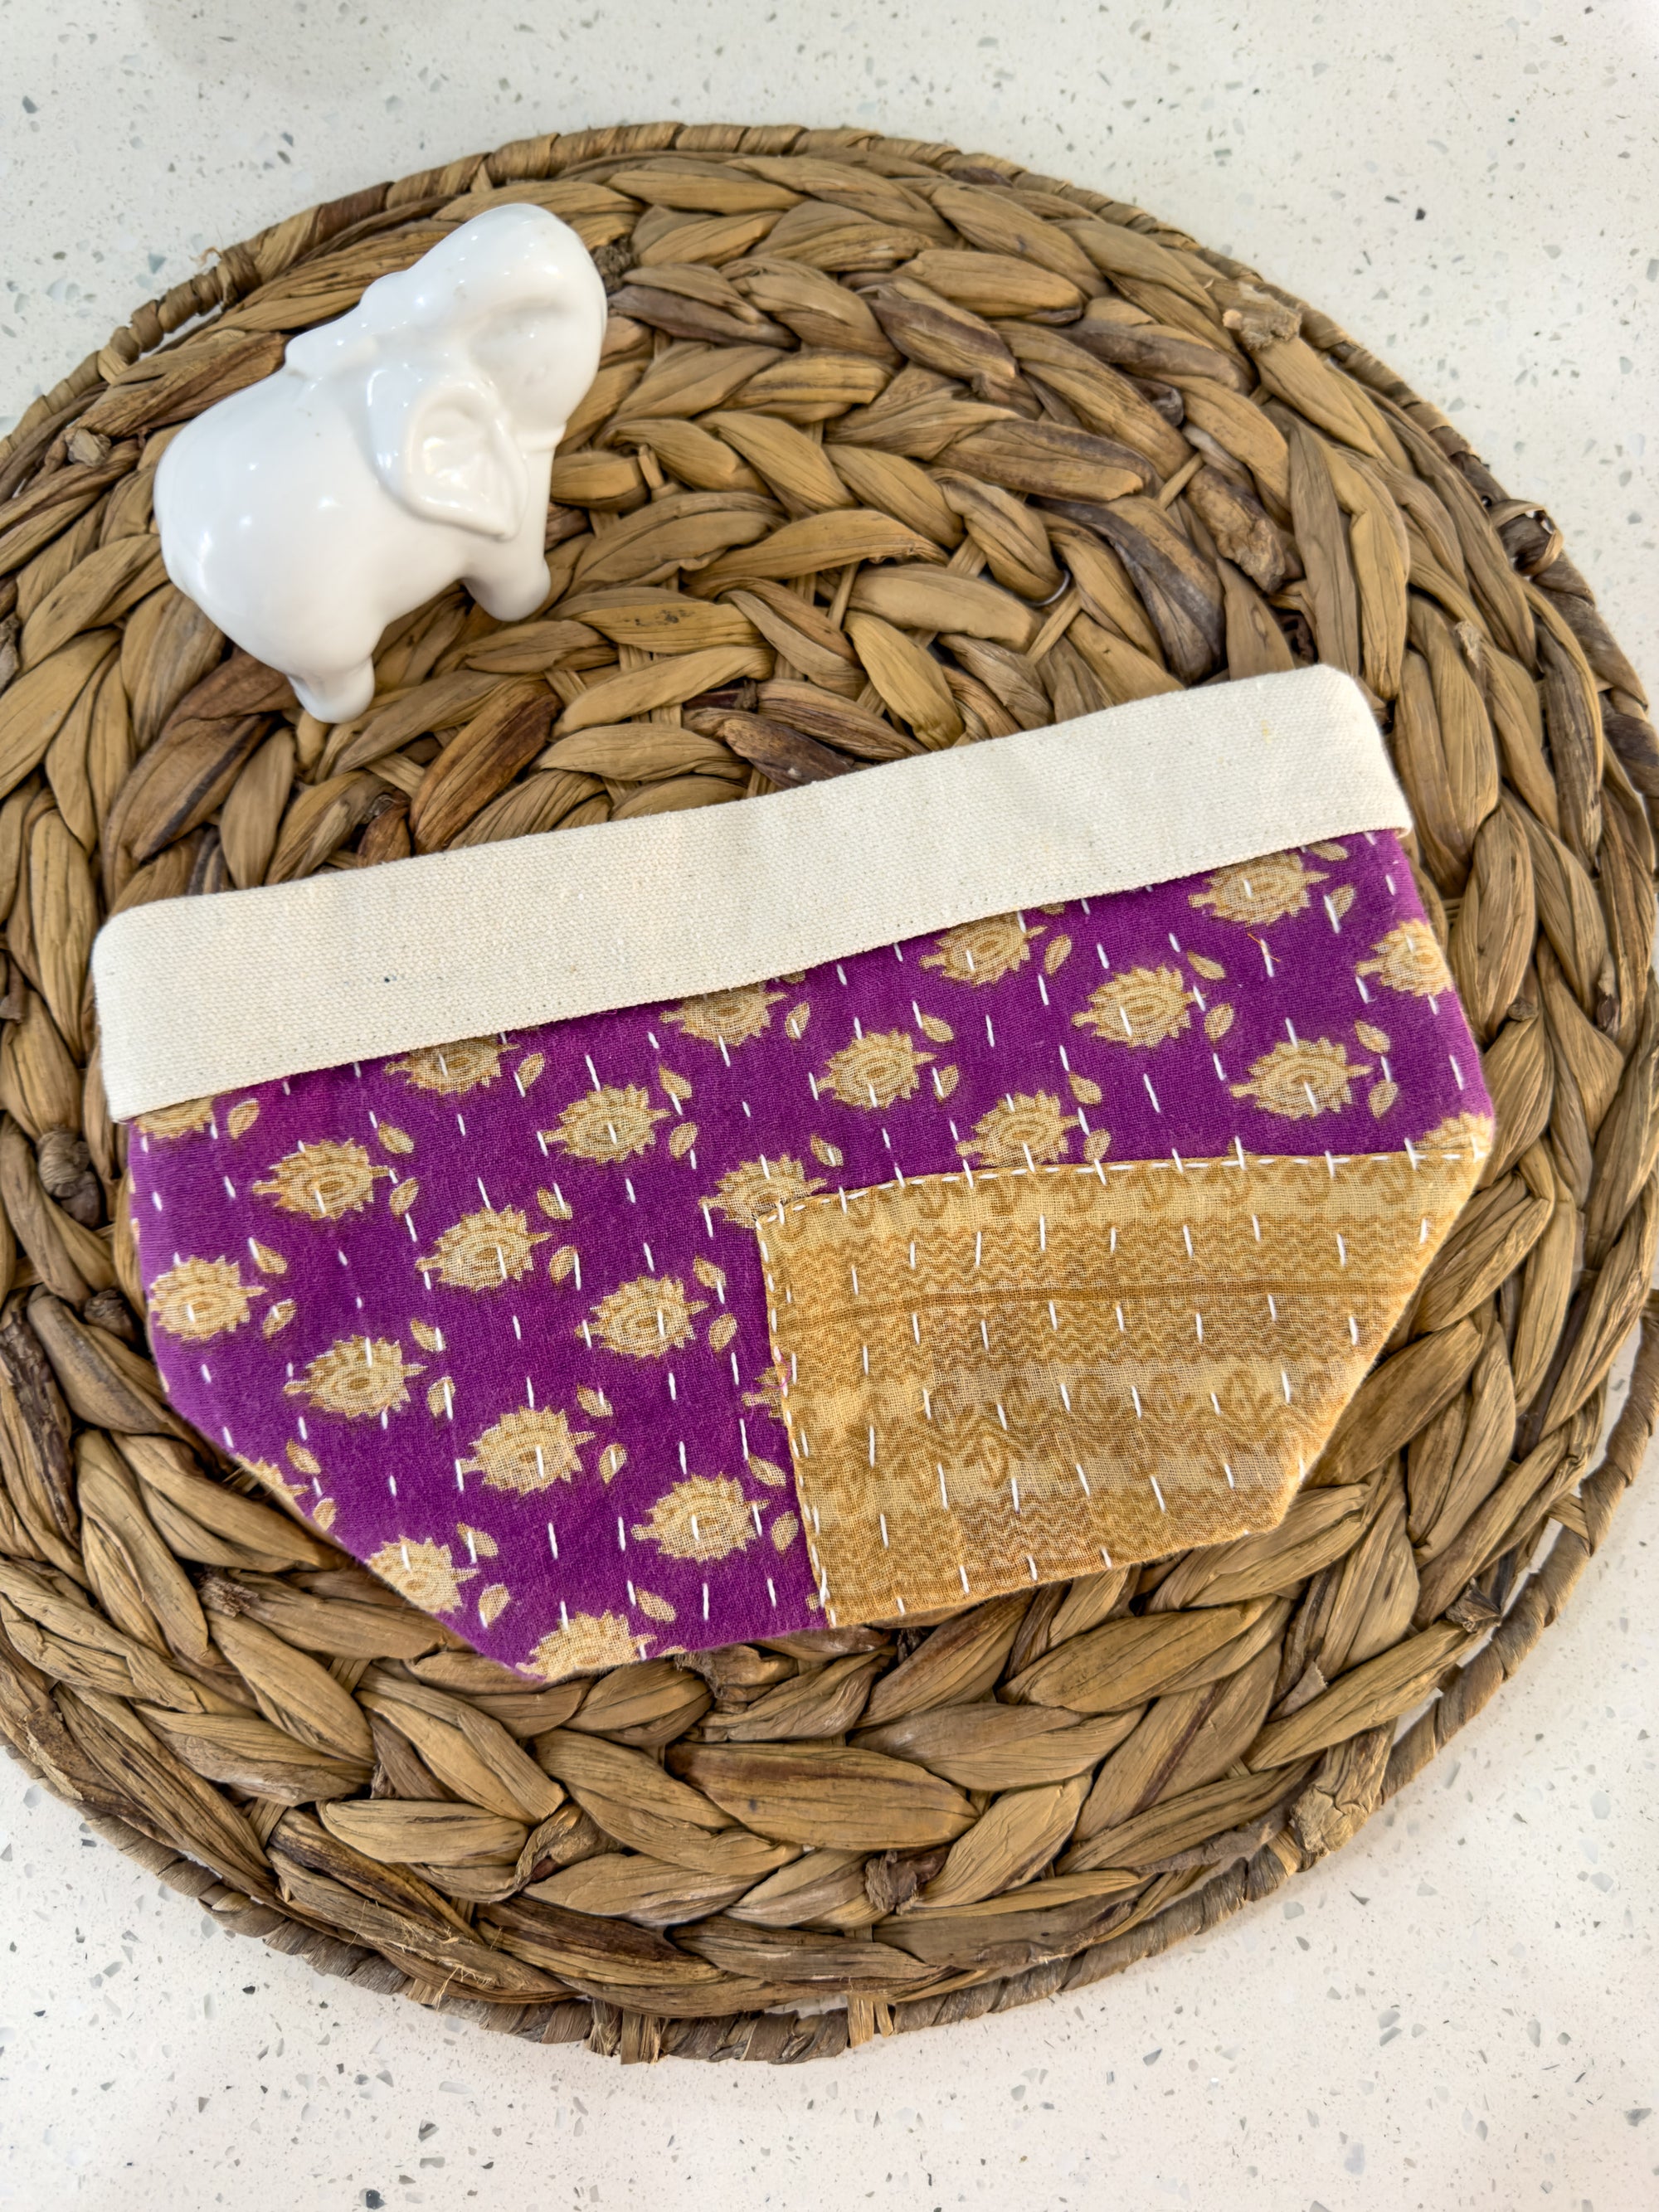 a purple and gold purse sitting on top of a wicker basket